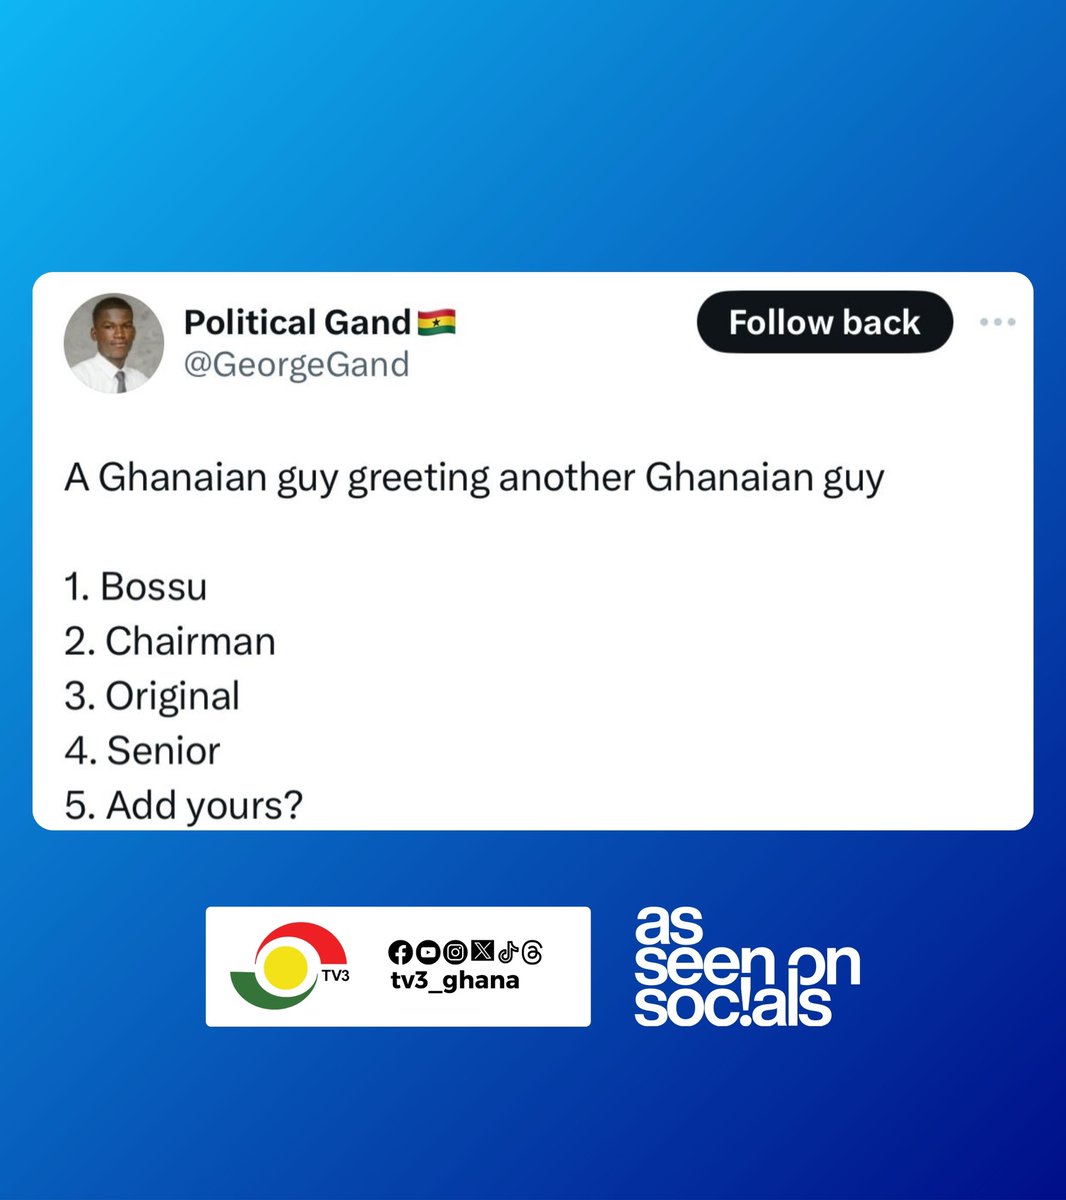 Add yours 😆⬇️

#TV3GH ✍🏼@GeorgeGand